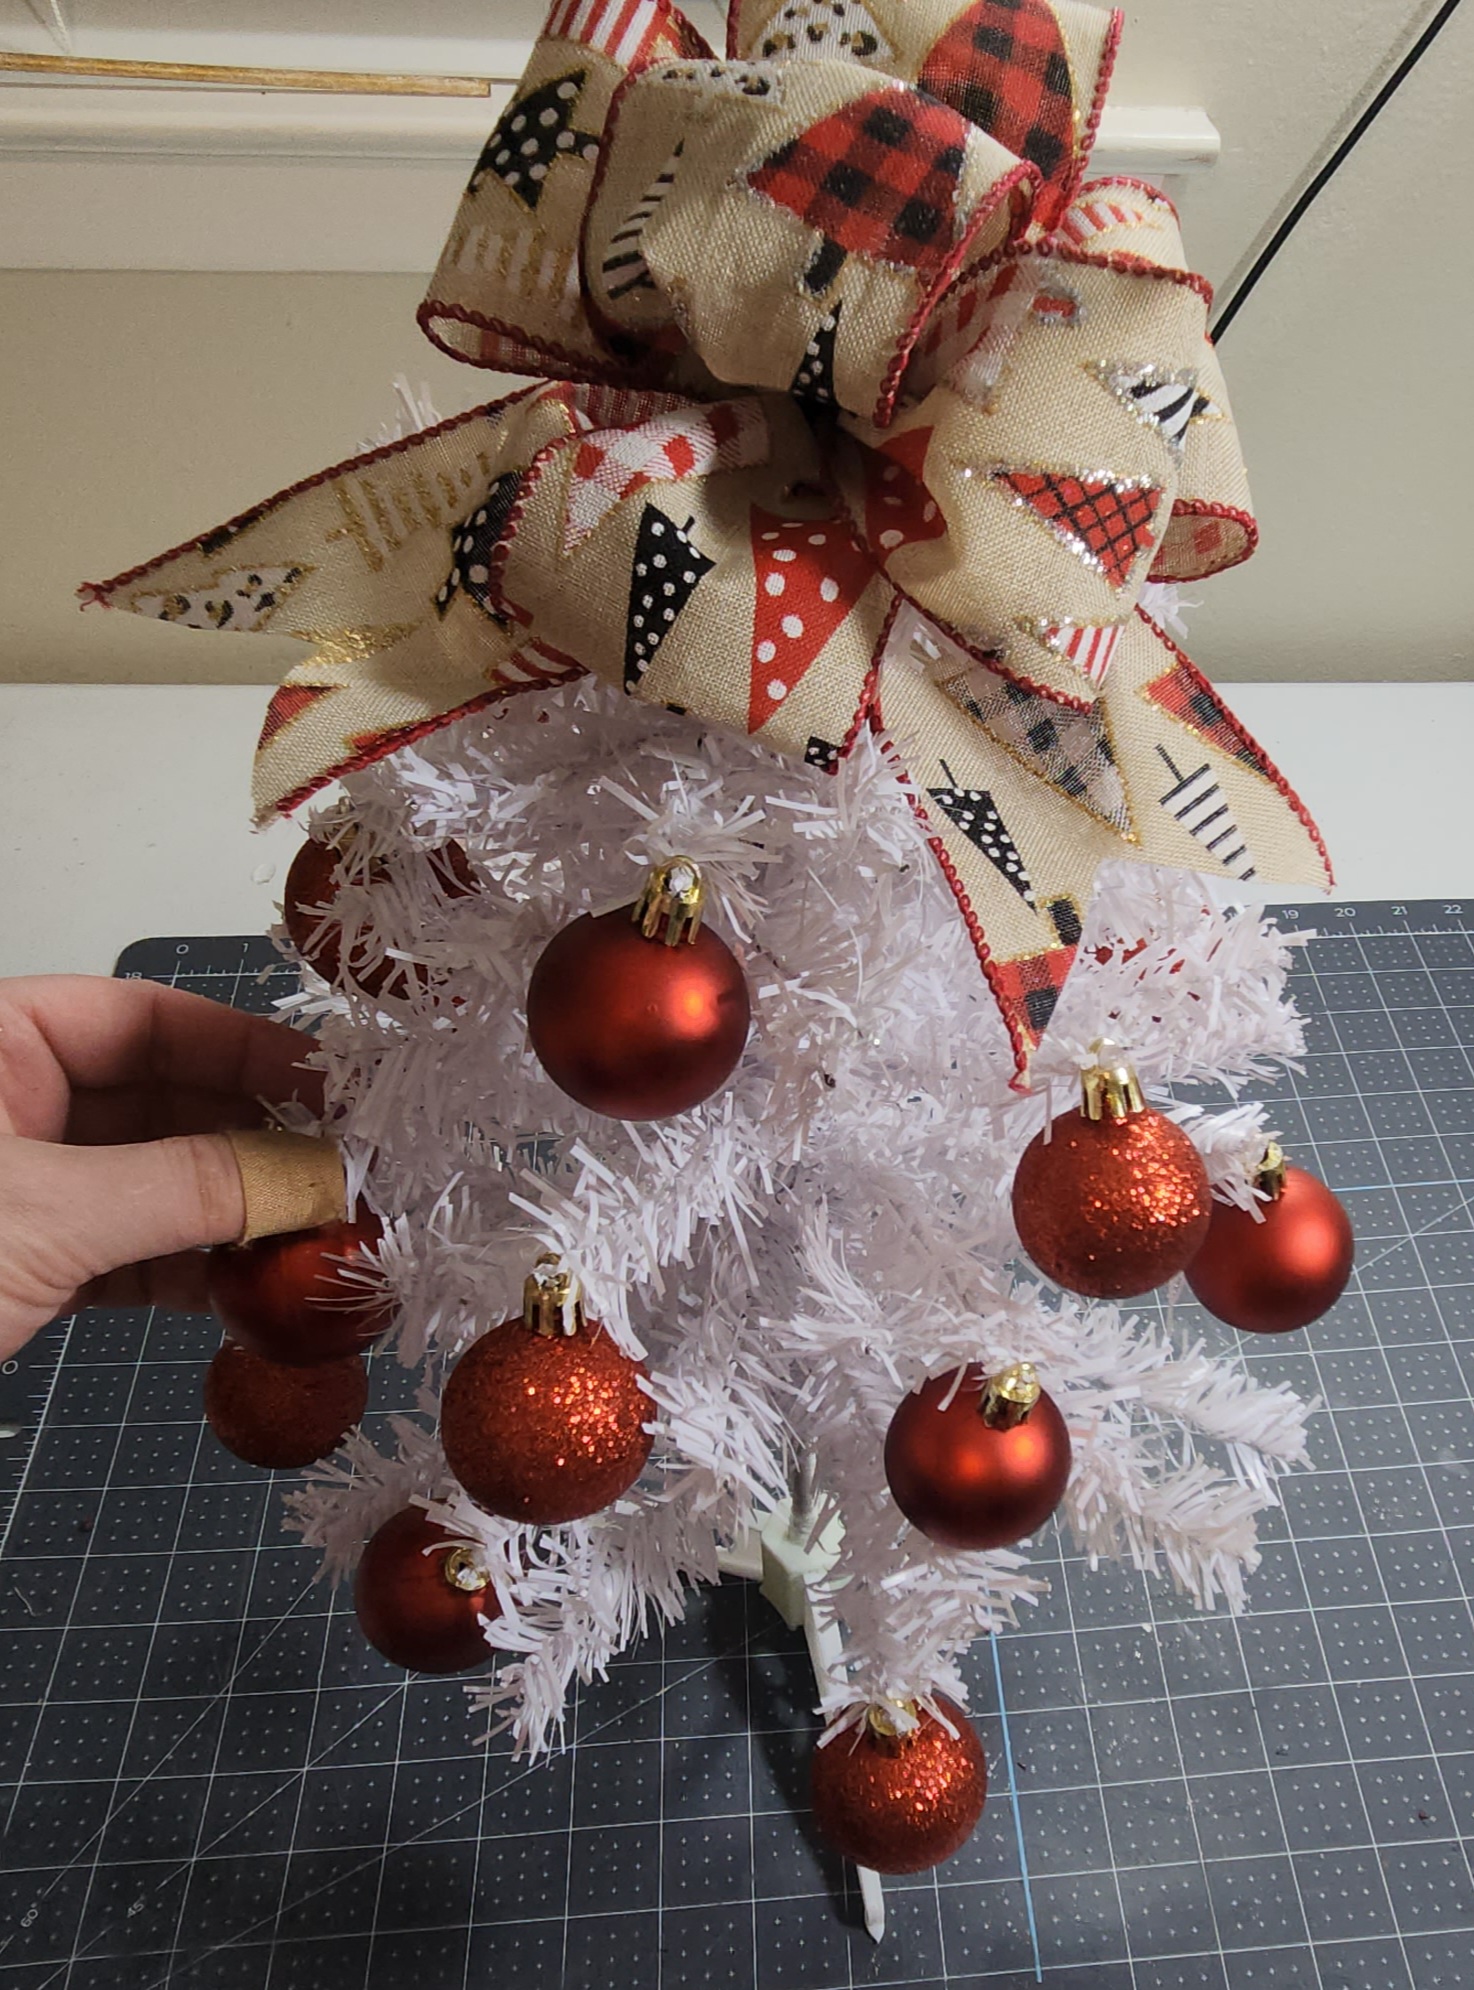 Sliding the hanger on the top of a ball ornament onto the tree branch.